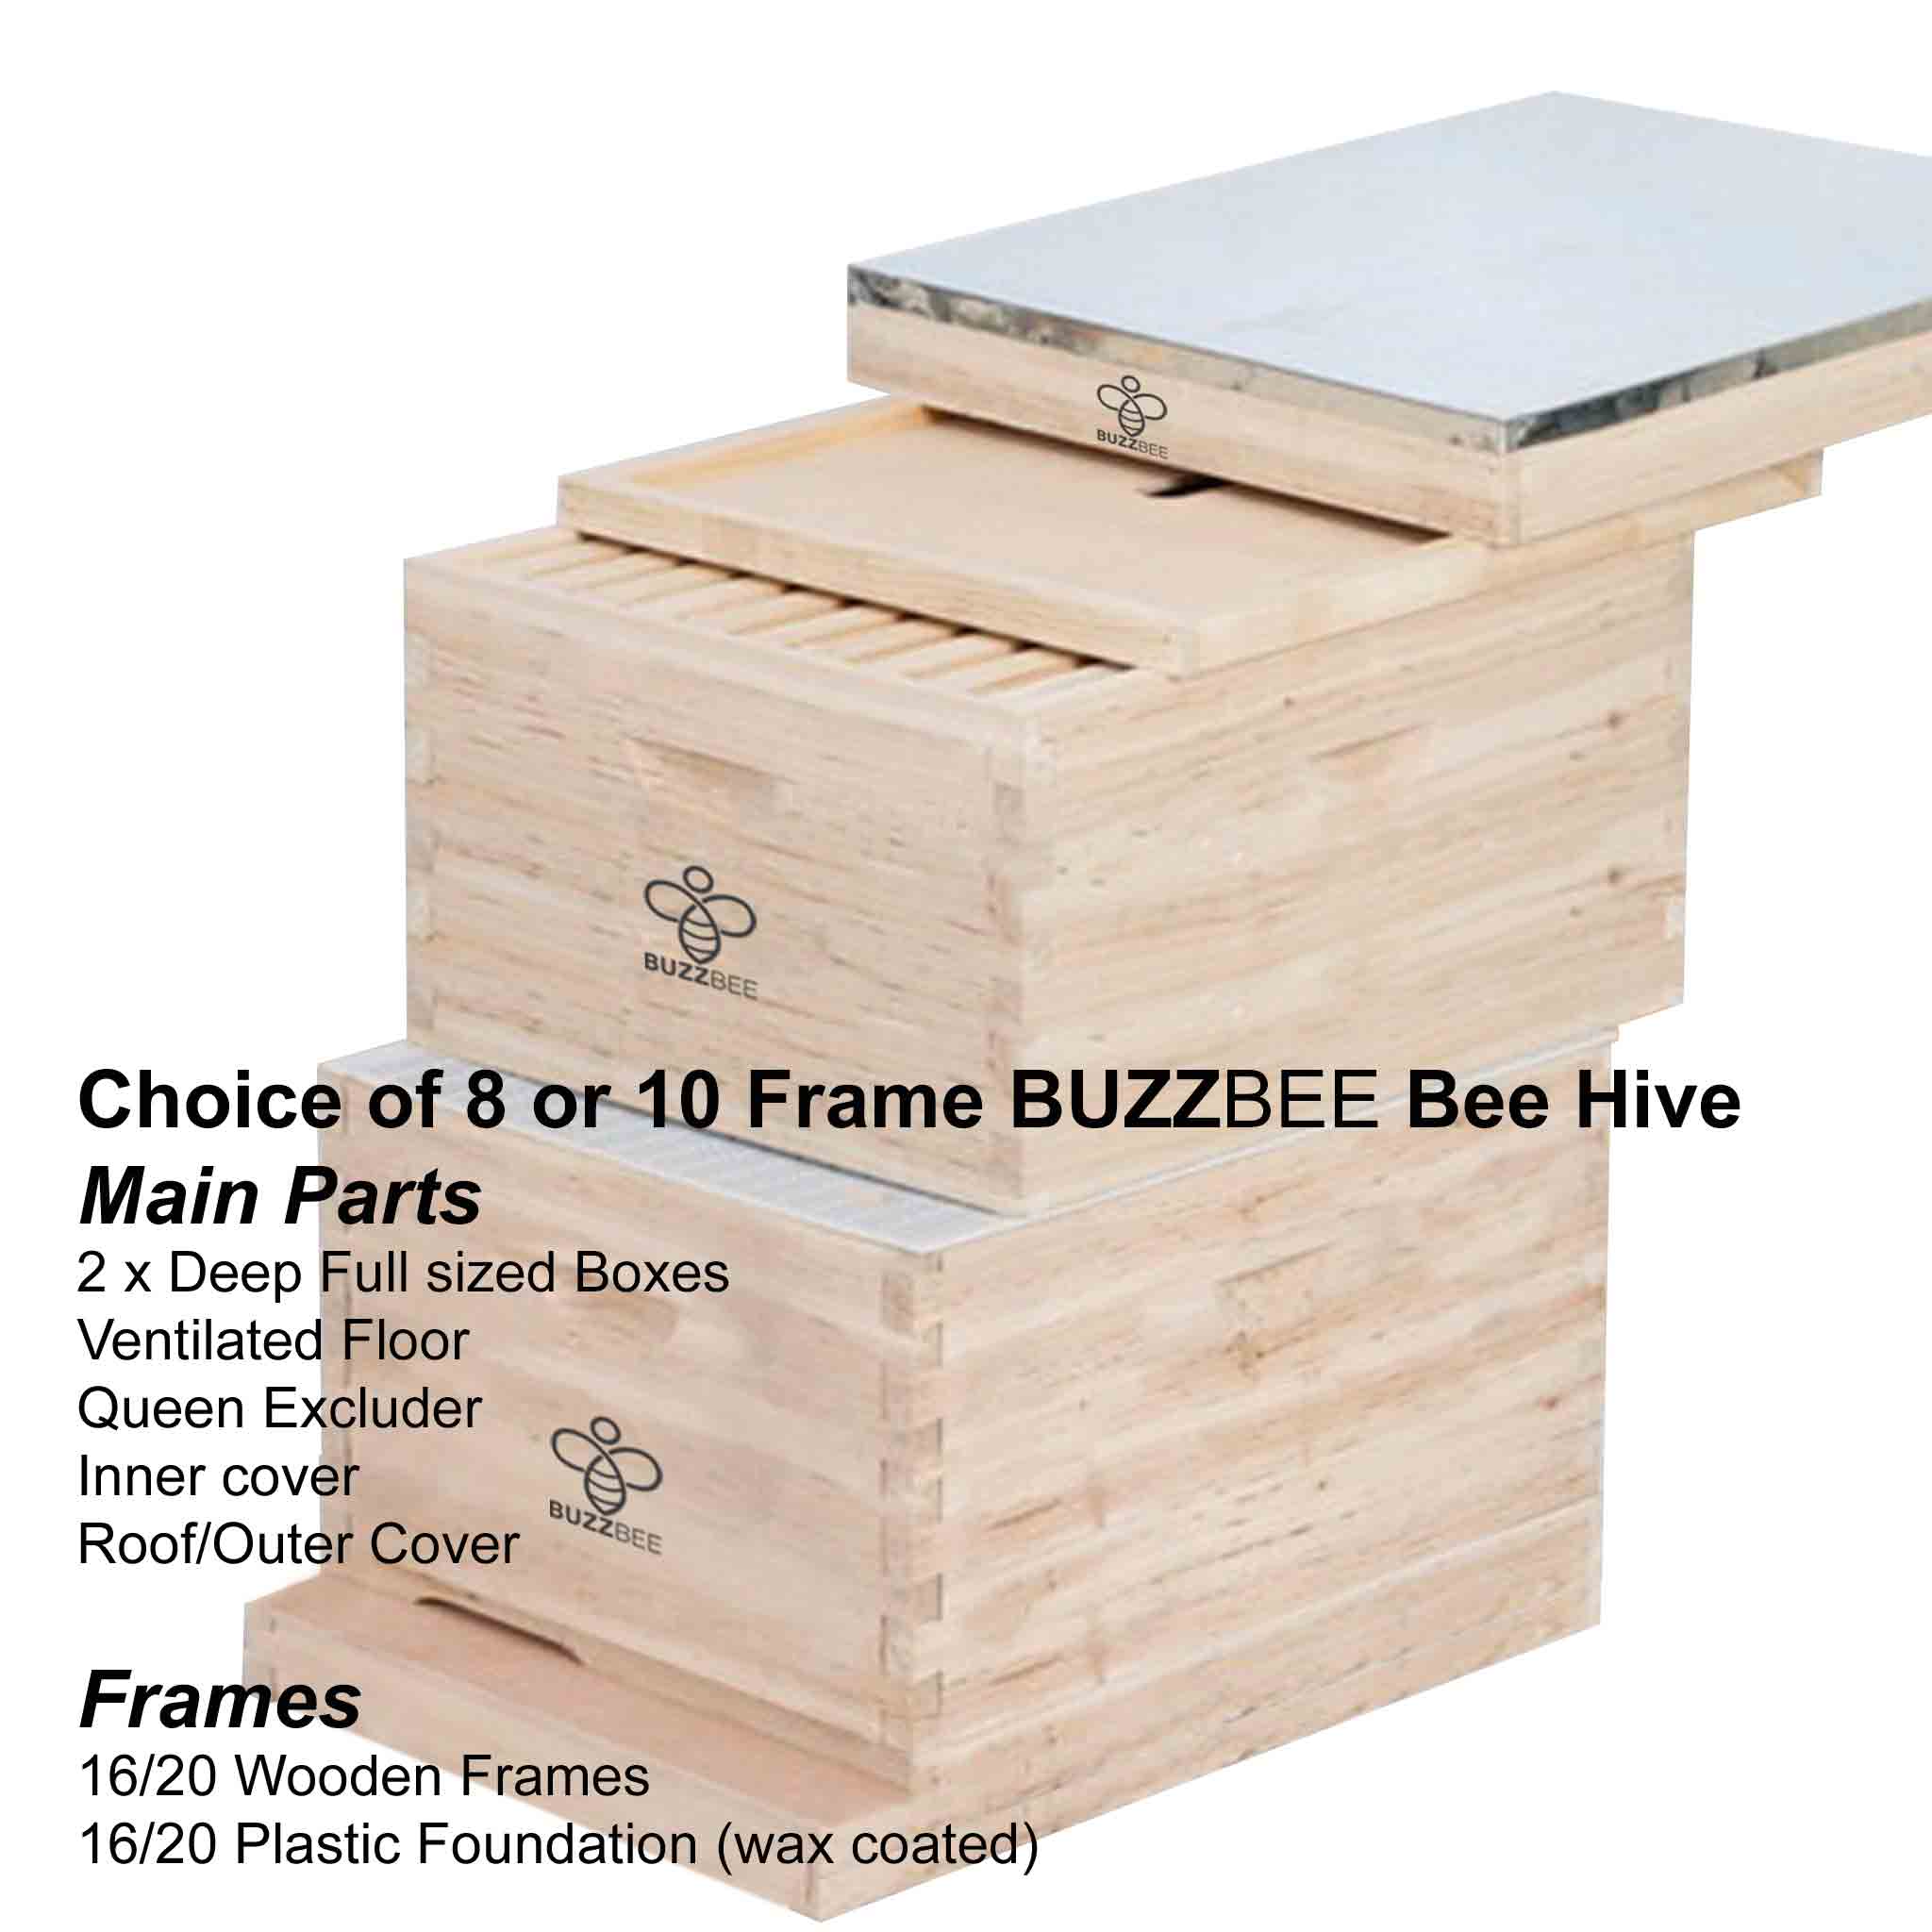 Basic PLUS Beekeeping Starter Kit package - Kit collection by Buzzbee Beekeeping Supplies